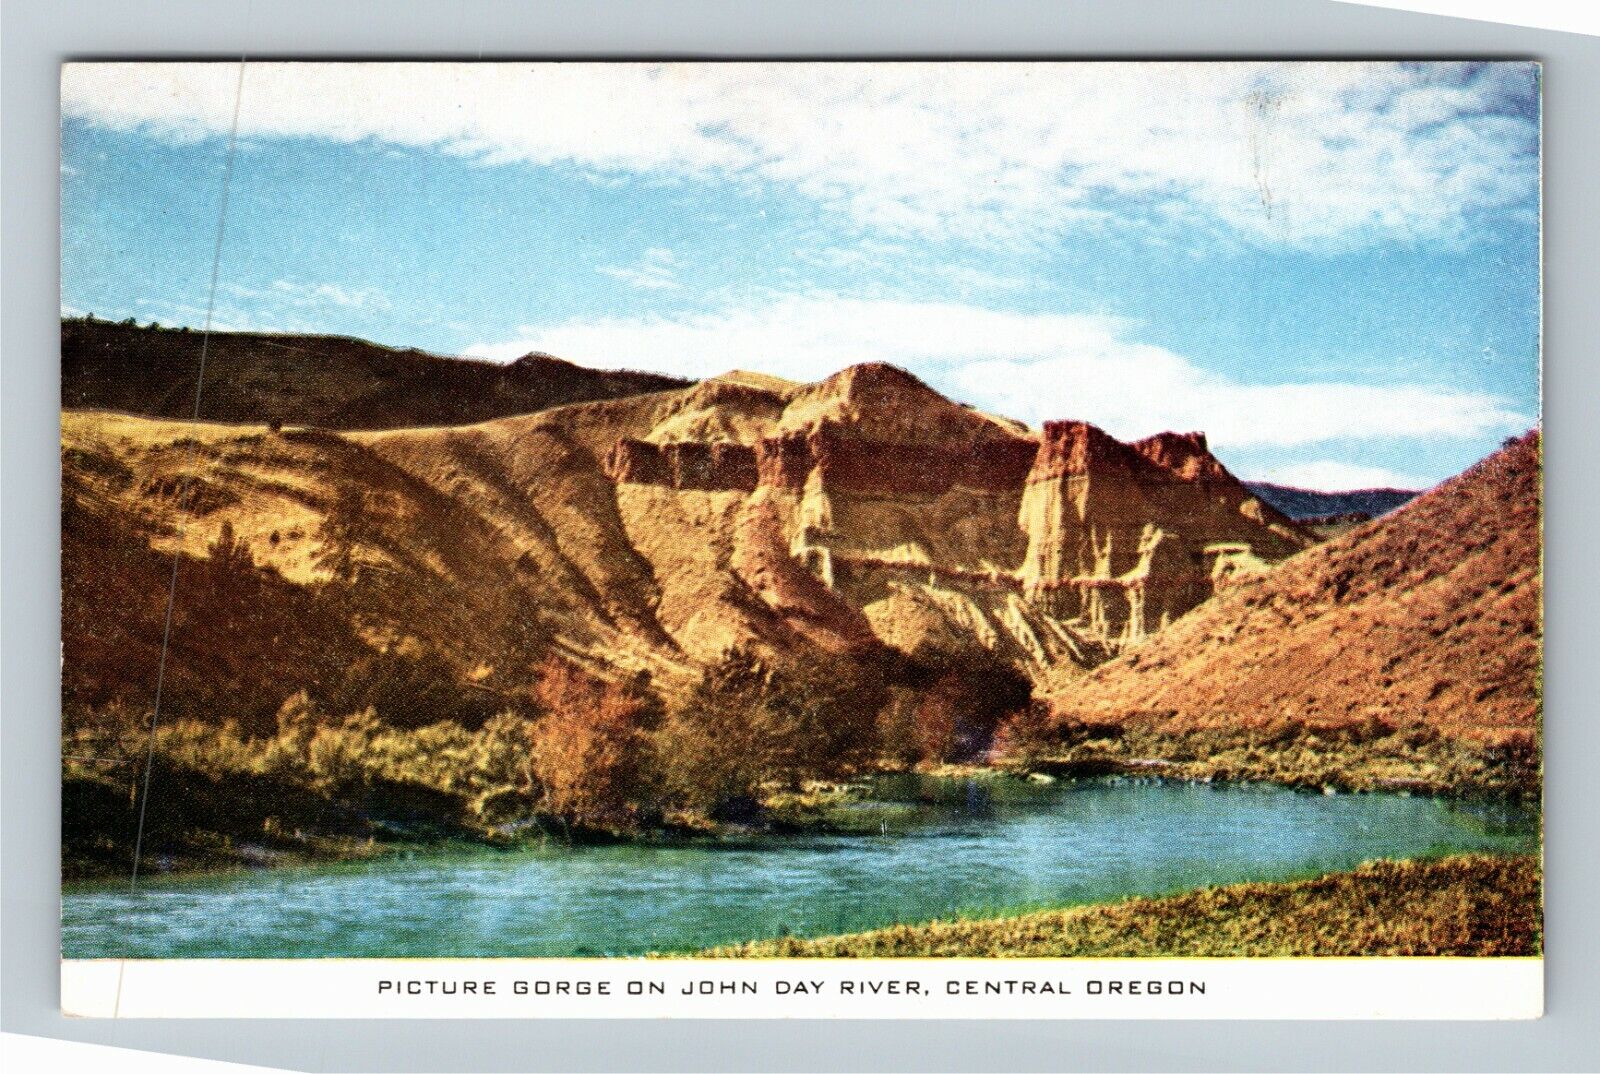 John Day River Central OR-Oregon, Greetings, Scenic Gorge View Vintage Postcard